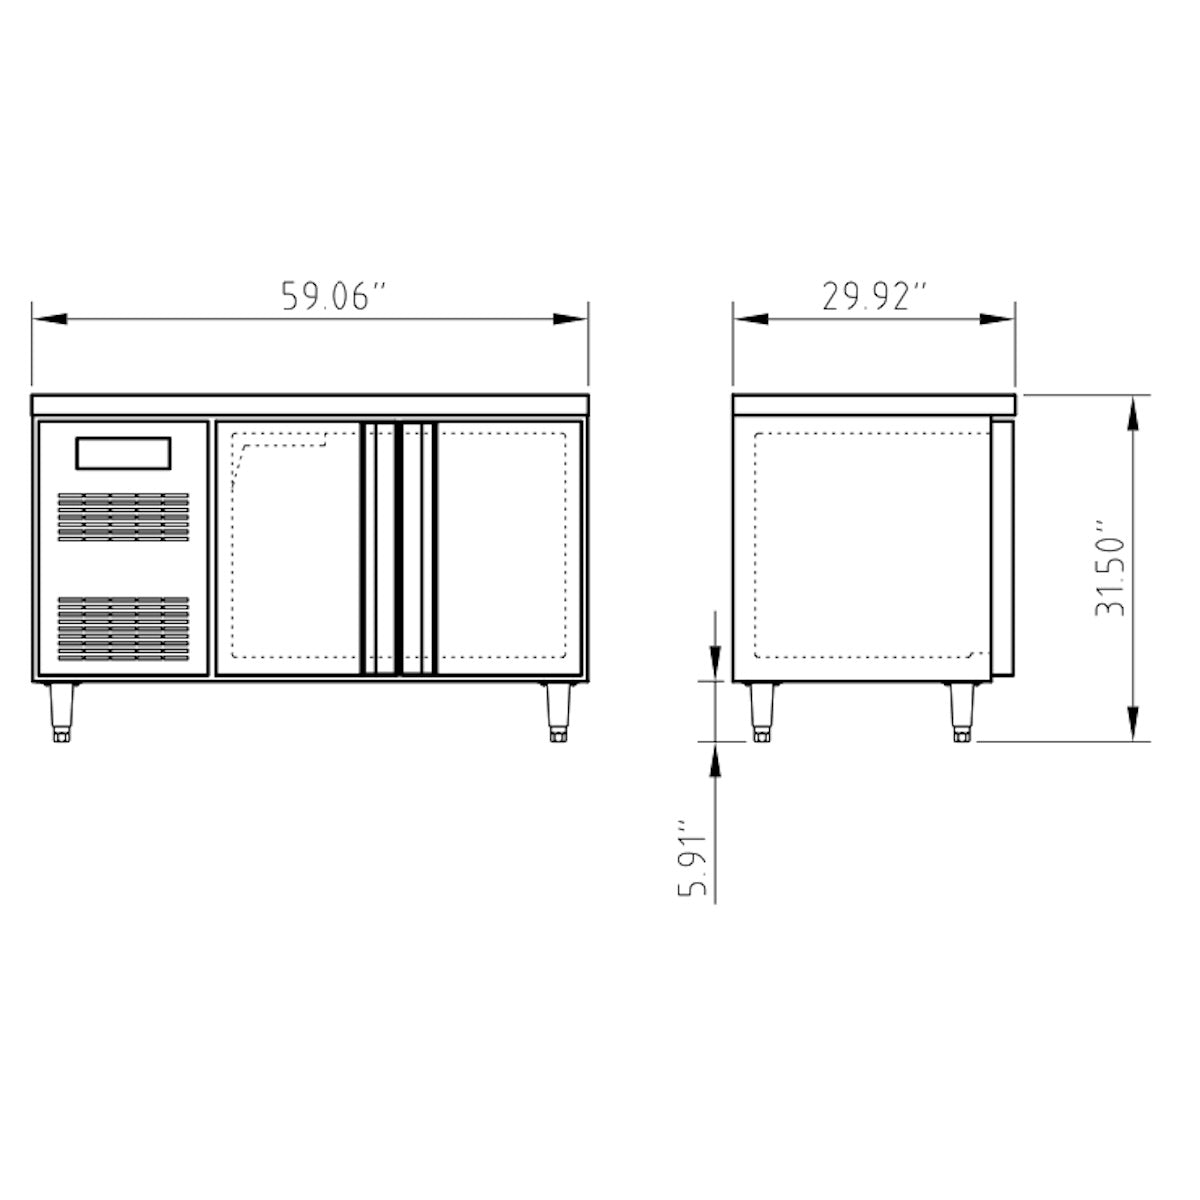 A diagram of a Kings Bottle 59" Two Stainless Steel Door Back Bar Cooler, showing adjustable shelves and ample capacity for bottles and cans.